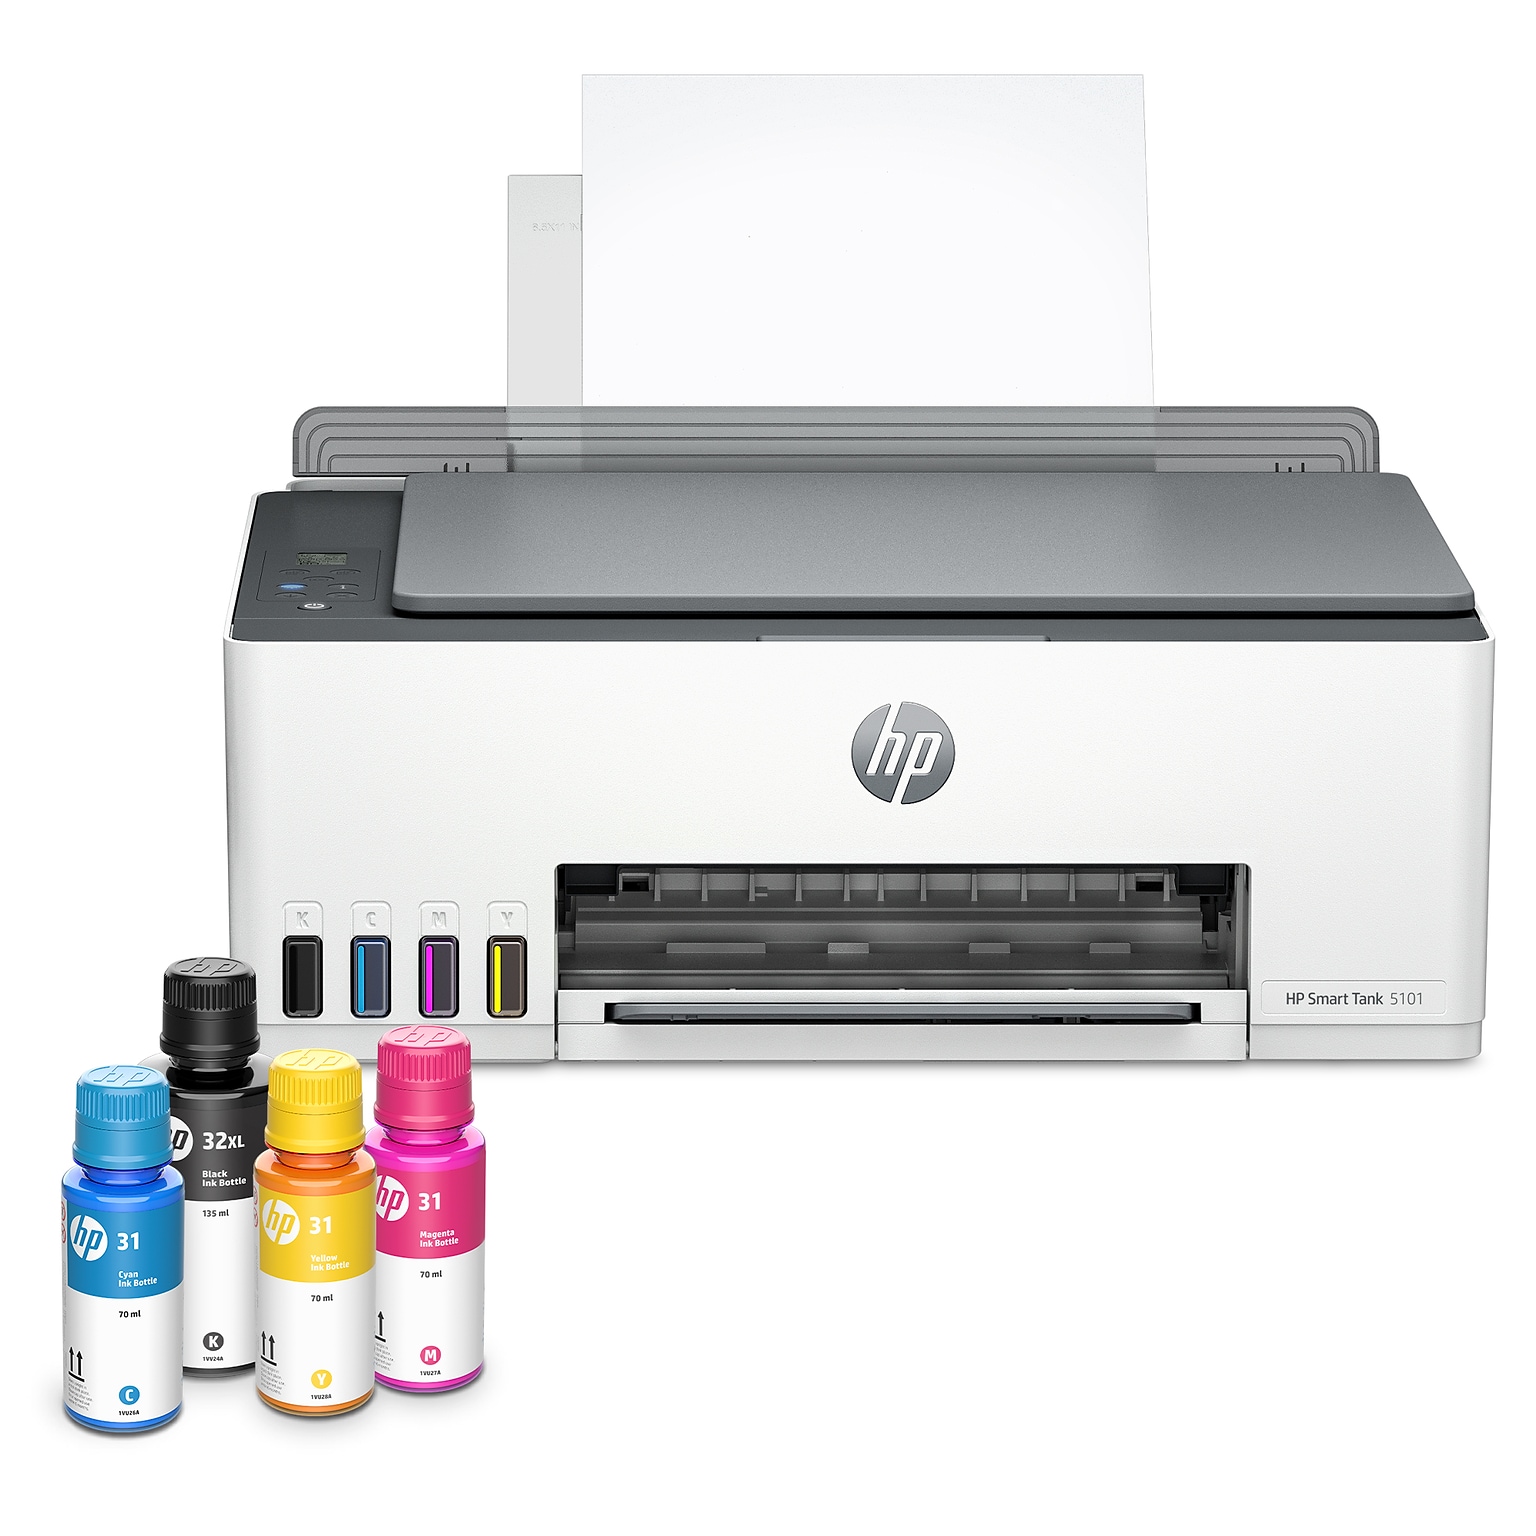 HP Smart Tank 5101 Wireless All-in-One Color Ink Tank Printer Scanner Copier, Best for Home, 2 years ink included (1F3Y0A)